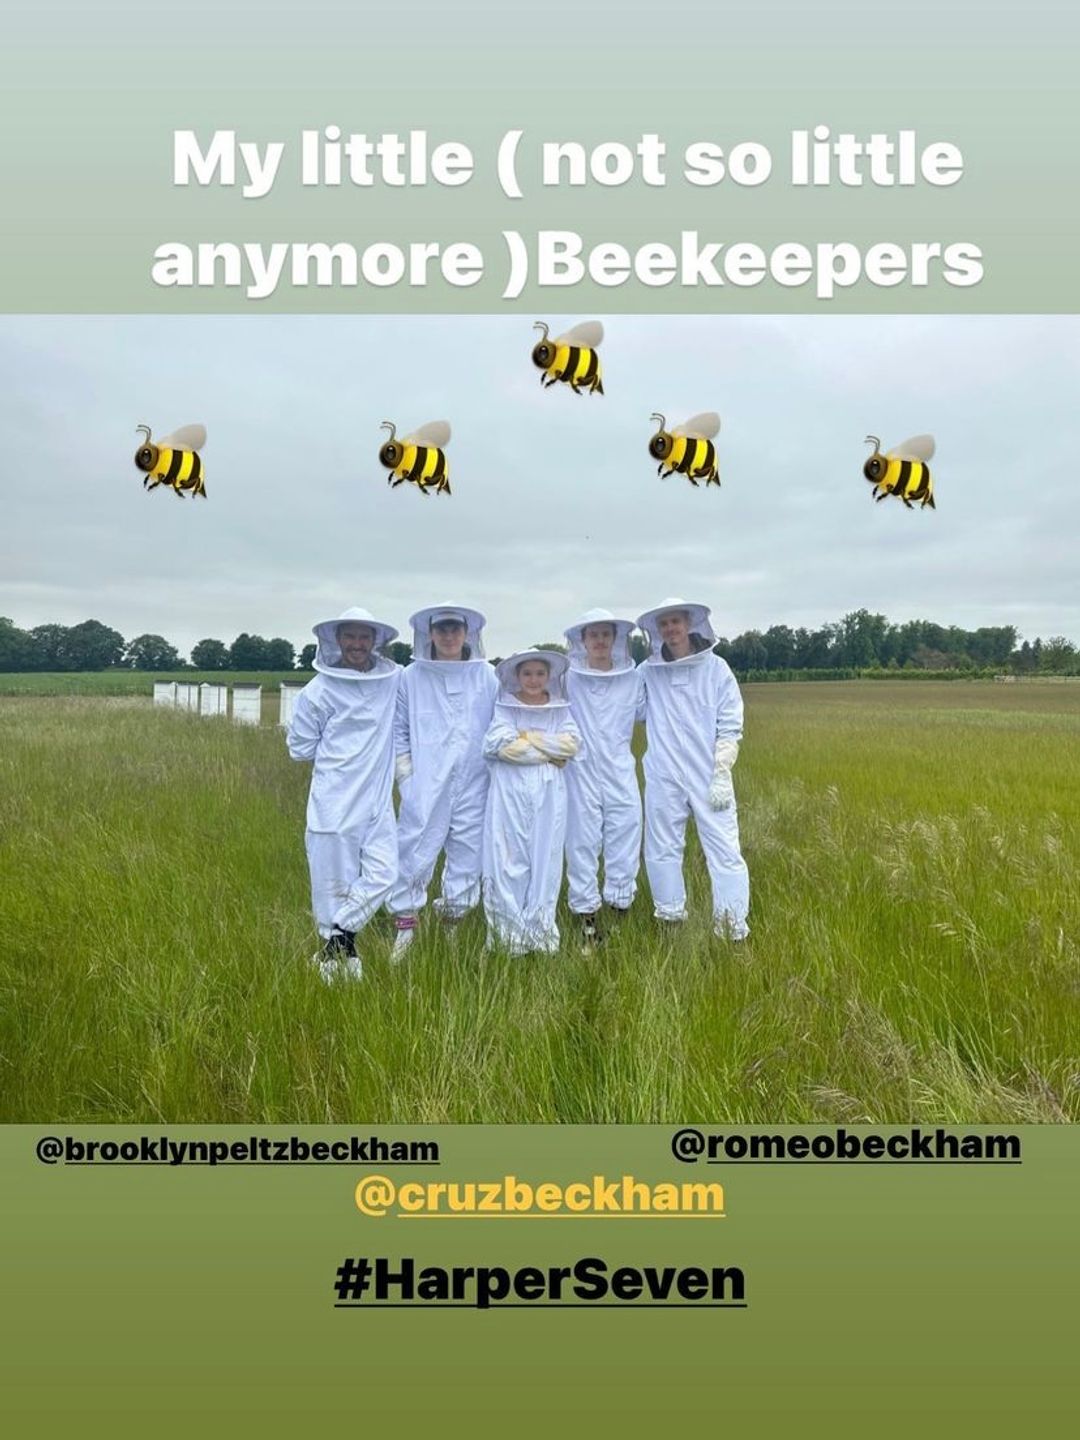 The Beckhams donned matching beekeeping outfits 